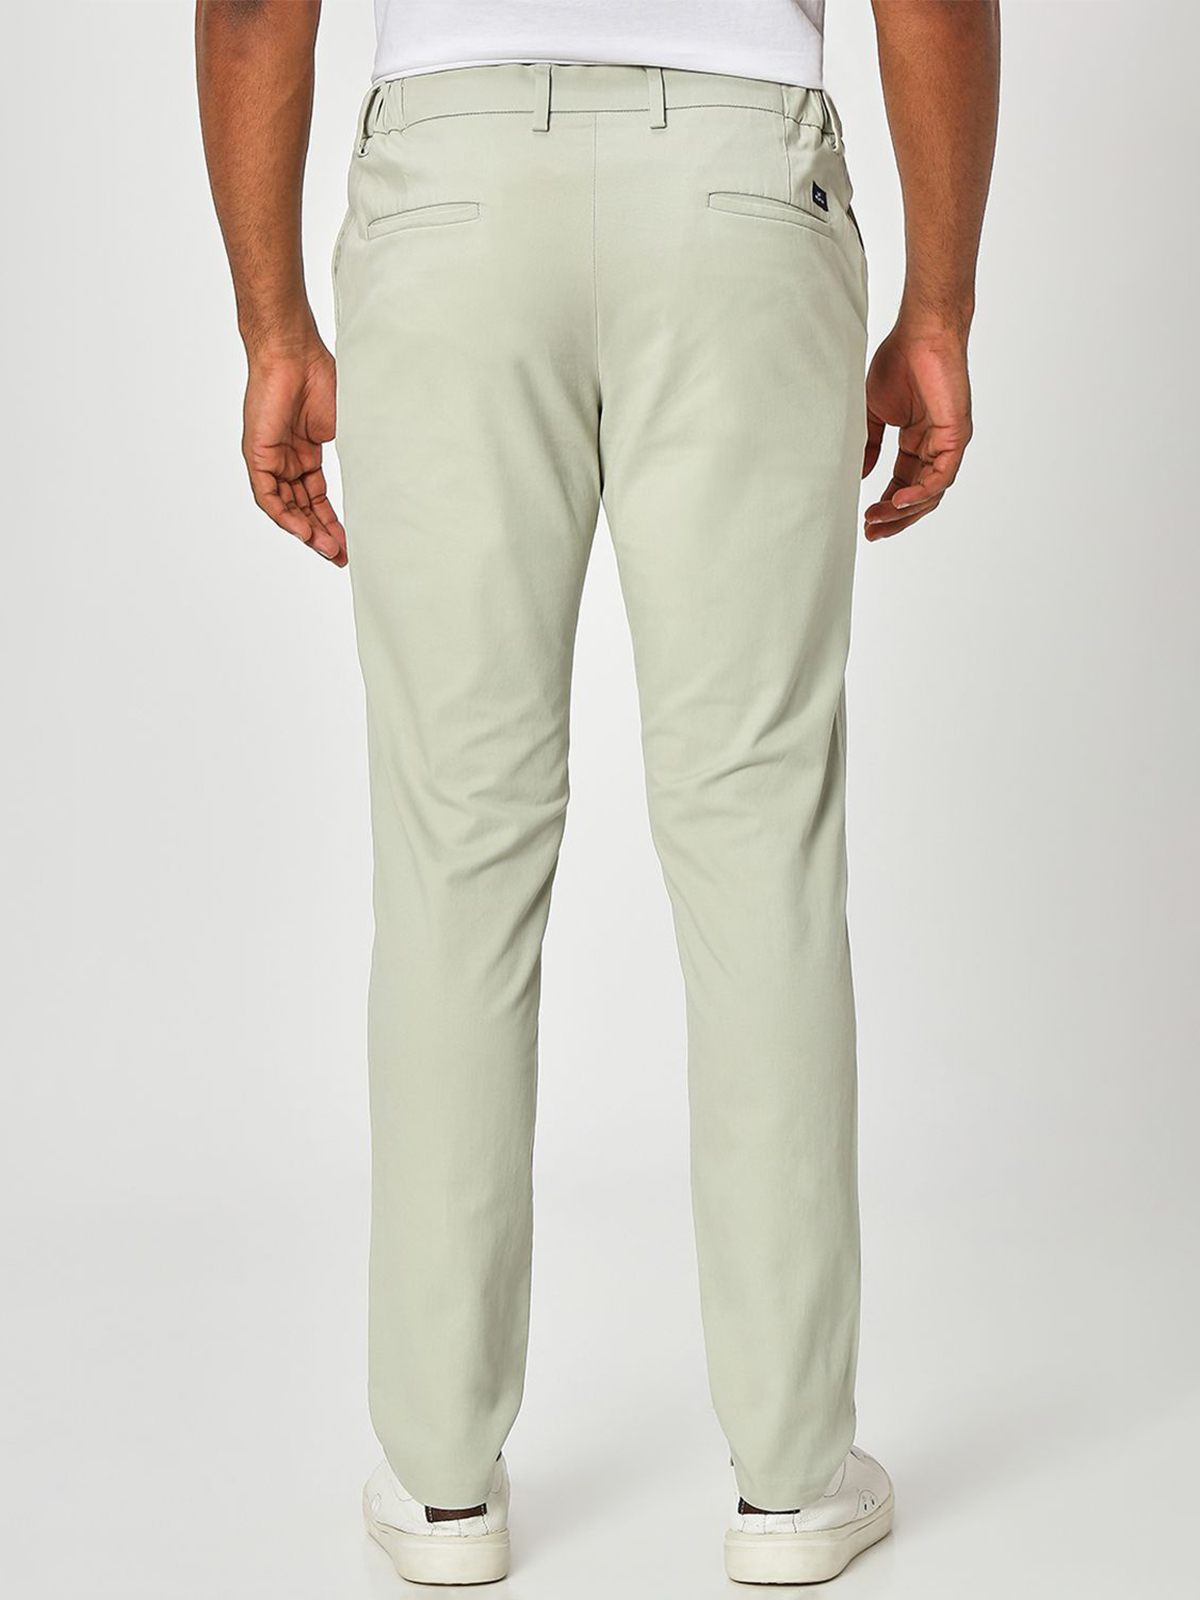 Buy Brown Trousers & Pants for Men by MUFTI Online | Ajio.com